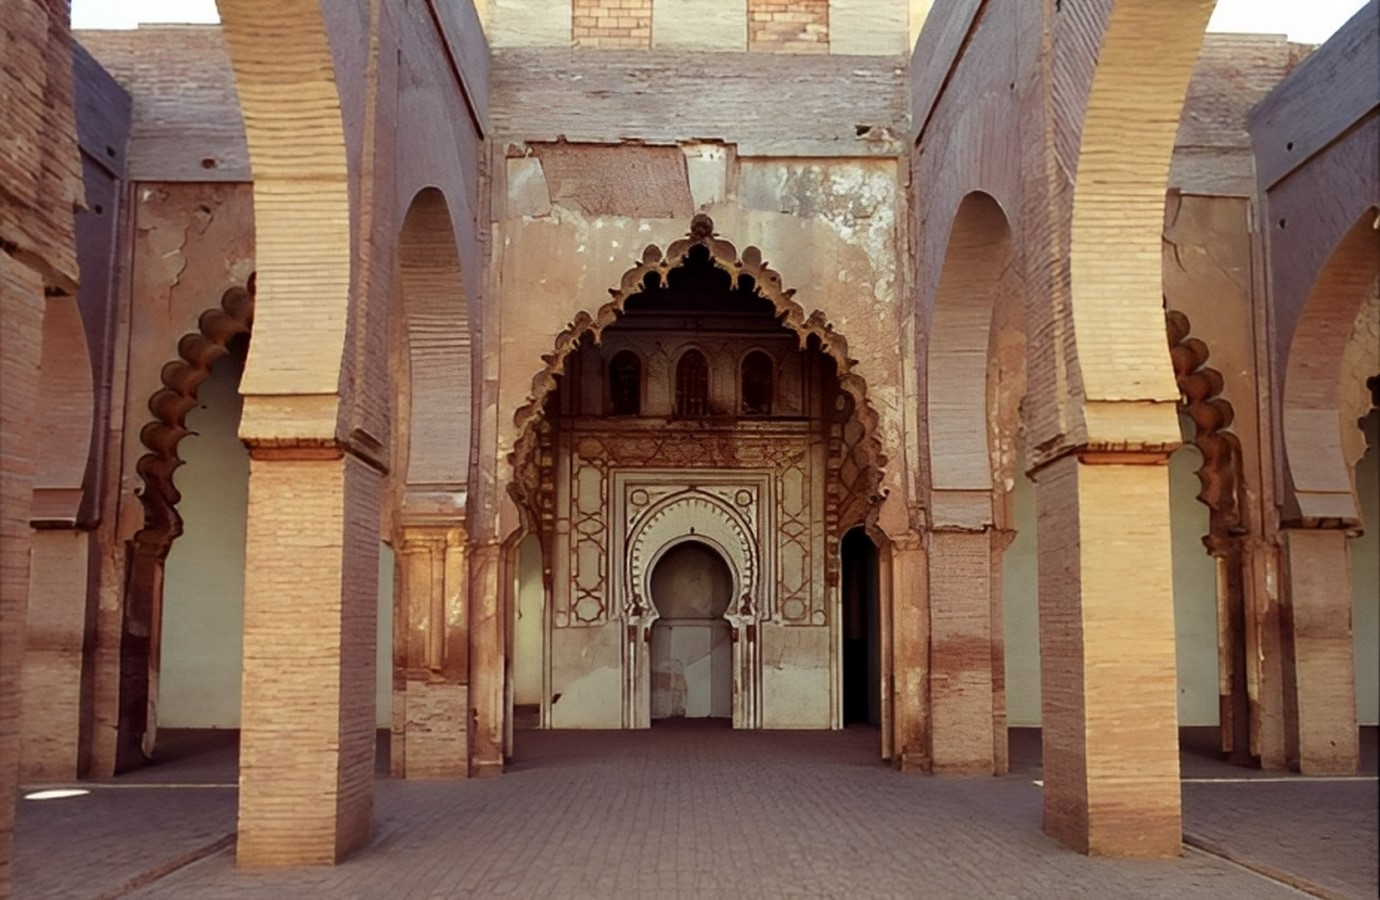 inside-the-mosque_©atlasobscura